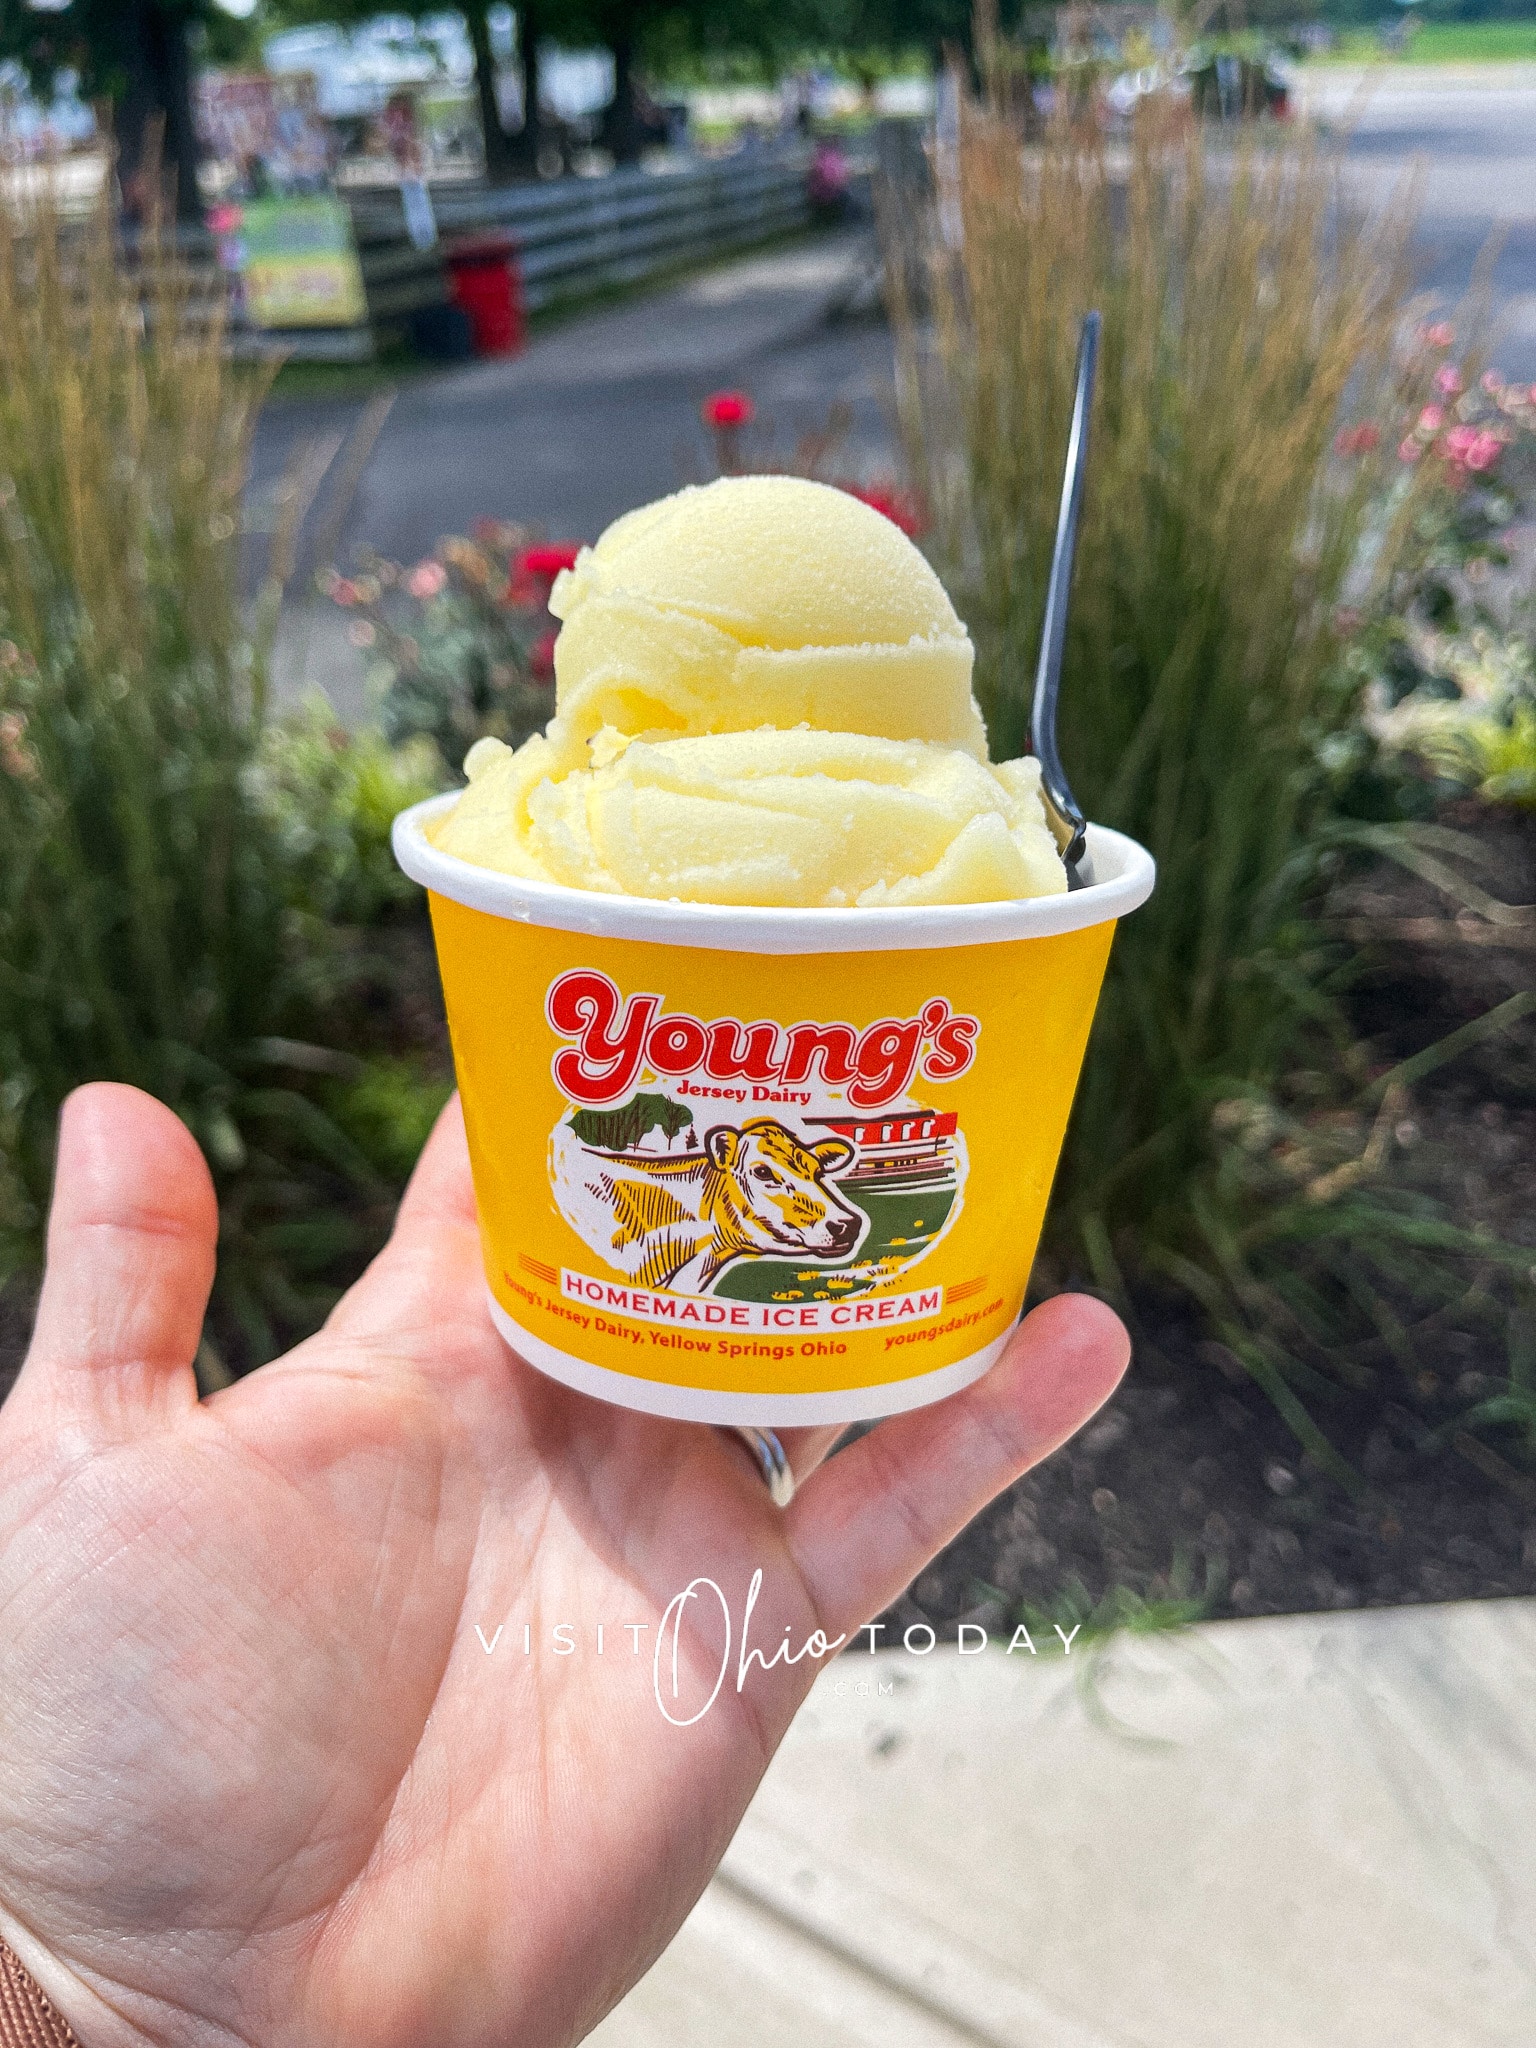 Vertical photo of a hand holding a yellow tub containing ice cream Photo credit: Cindy Gordon of VisitOhioToday.com